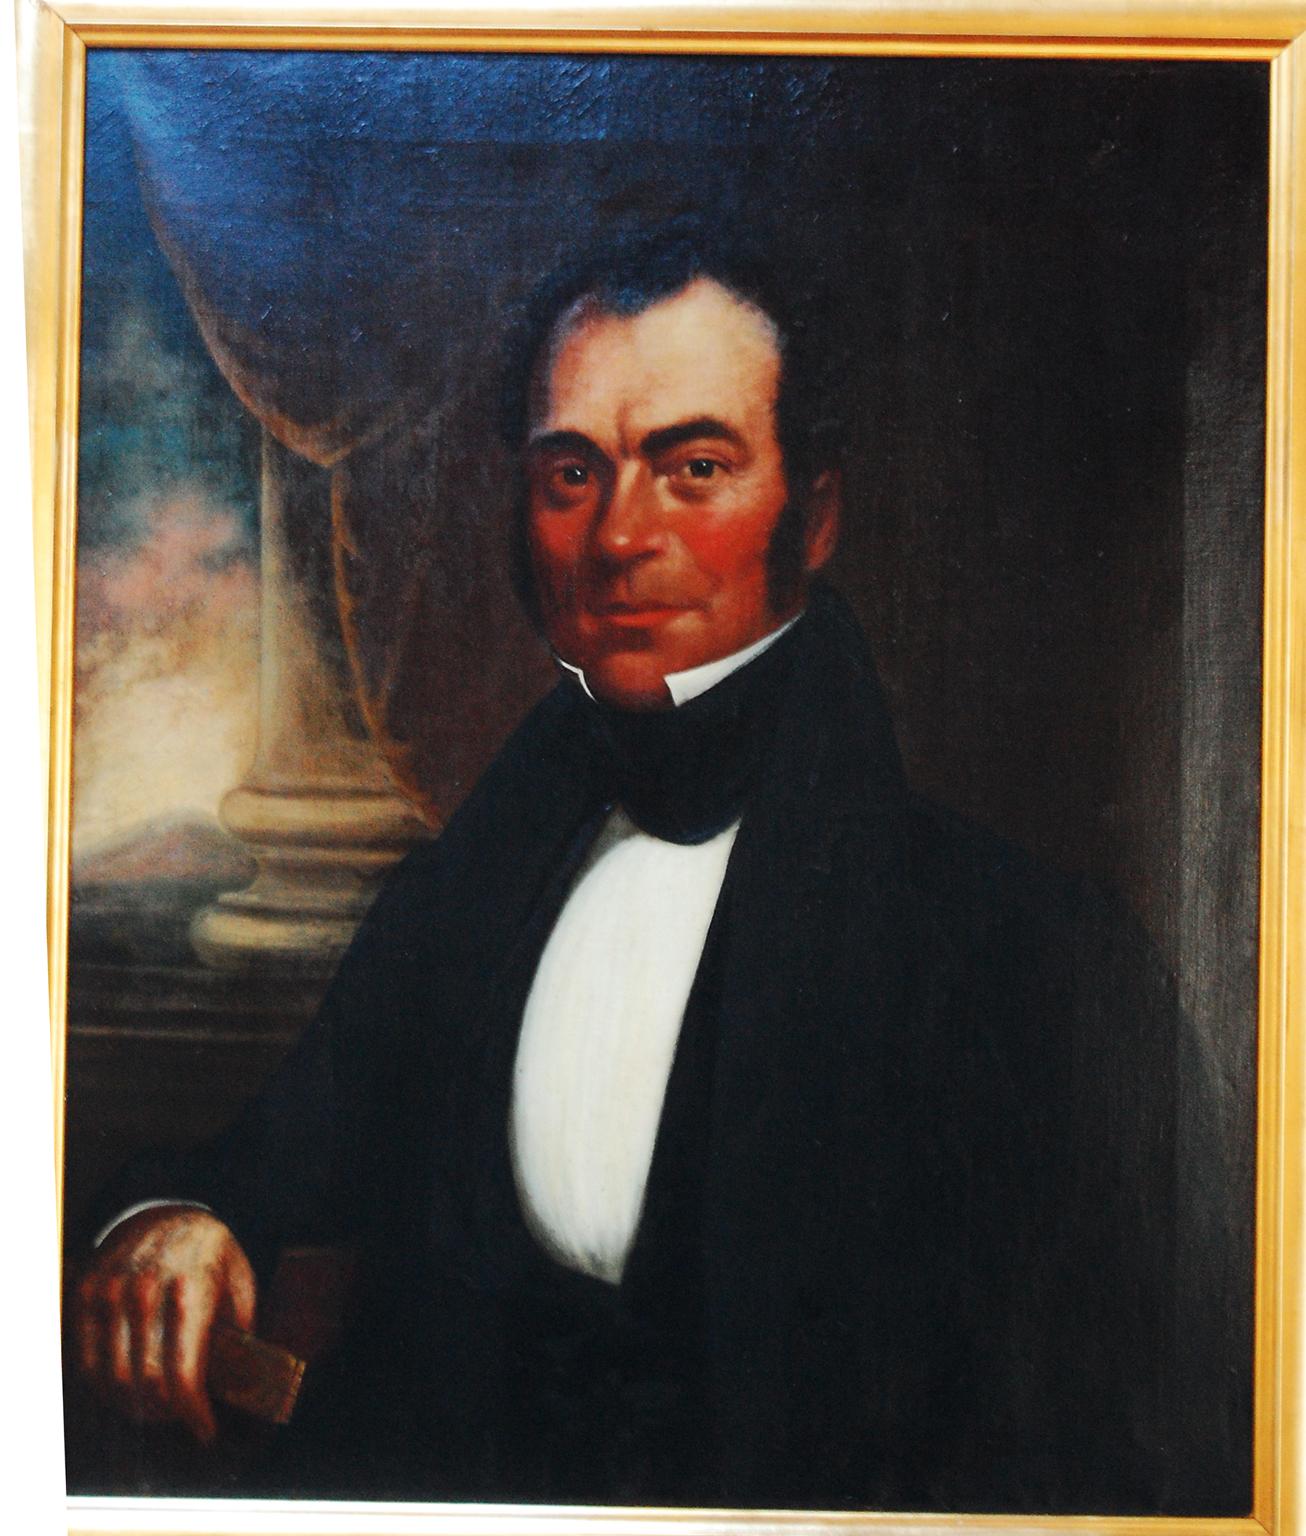 American original oil painting on canvas in contemporary gold frame.  This is a portrait of Edward W. Blaisdell (1845-1924) a prominent architect who worked primarily on the coast of New Hampshire and Maine.  He designed everything from bridges to